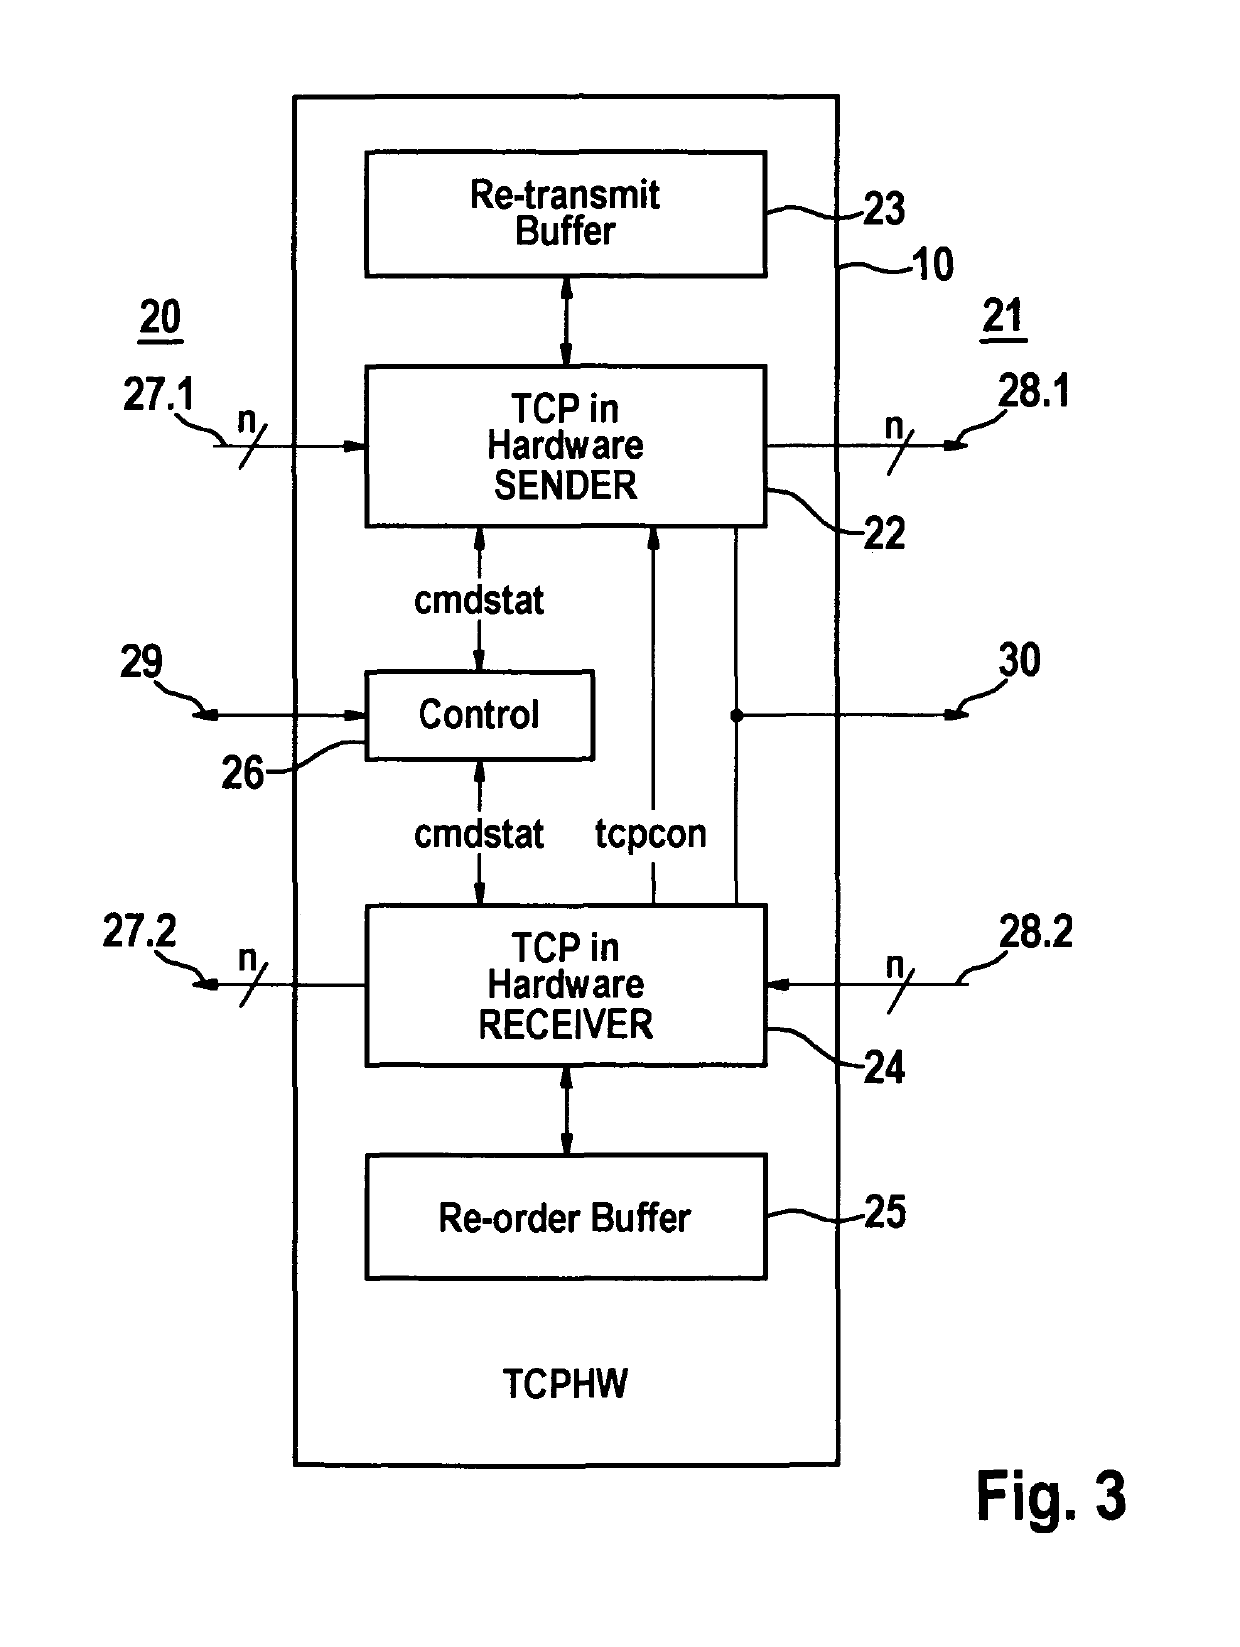 Distributed measurement arrangement for an embedded automotive acquisition device with TCP acceleration